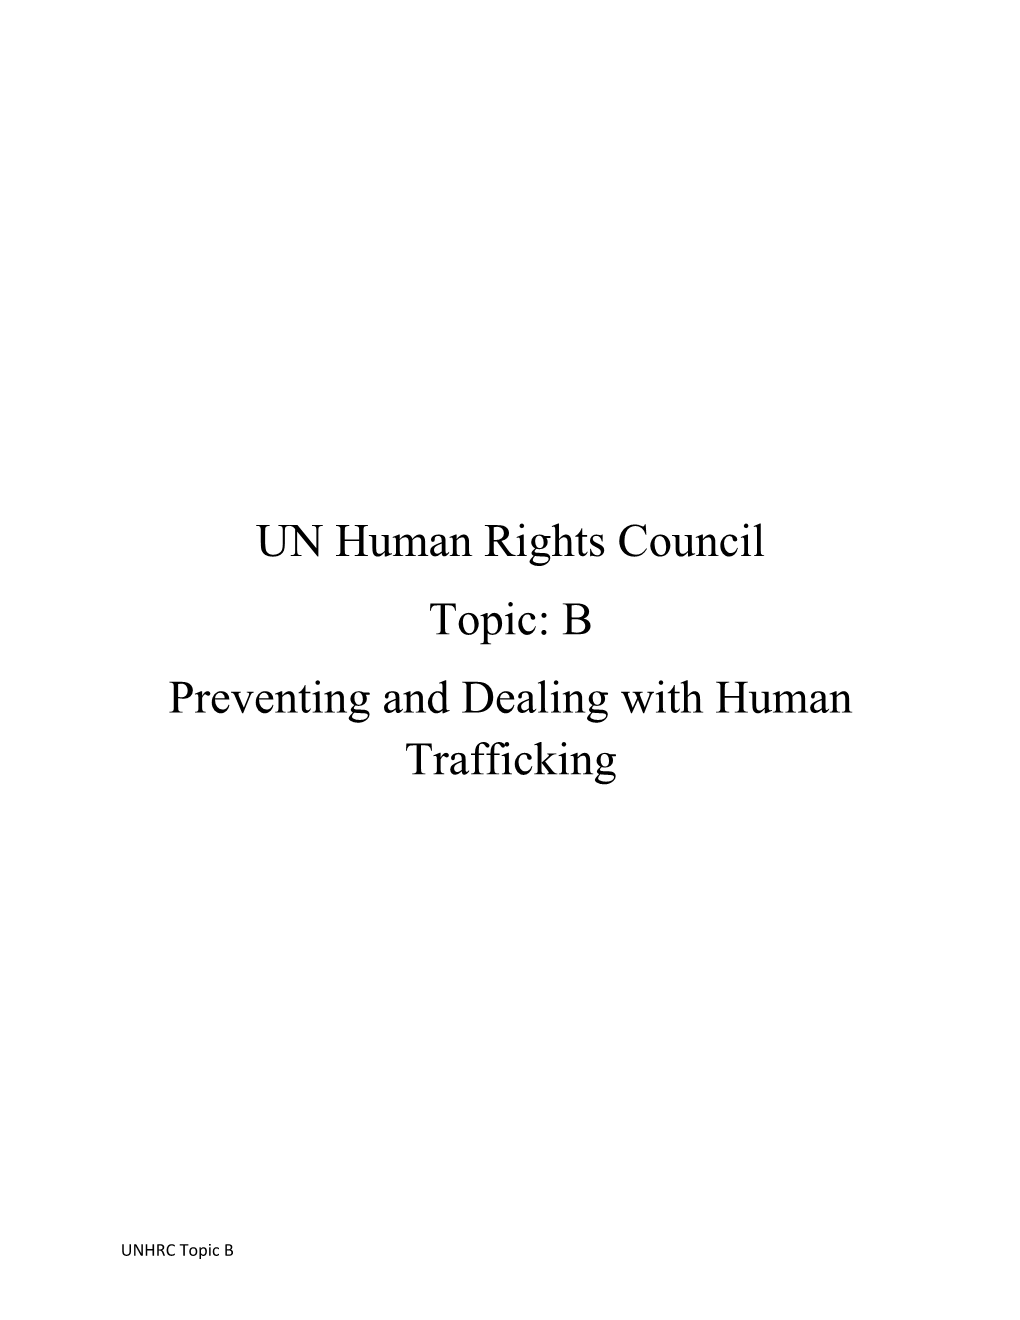 Preventing and Dealing with Human Trafficking